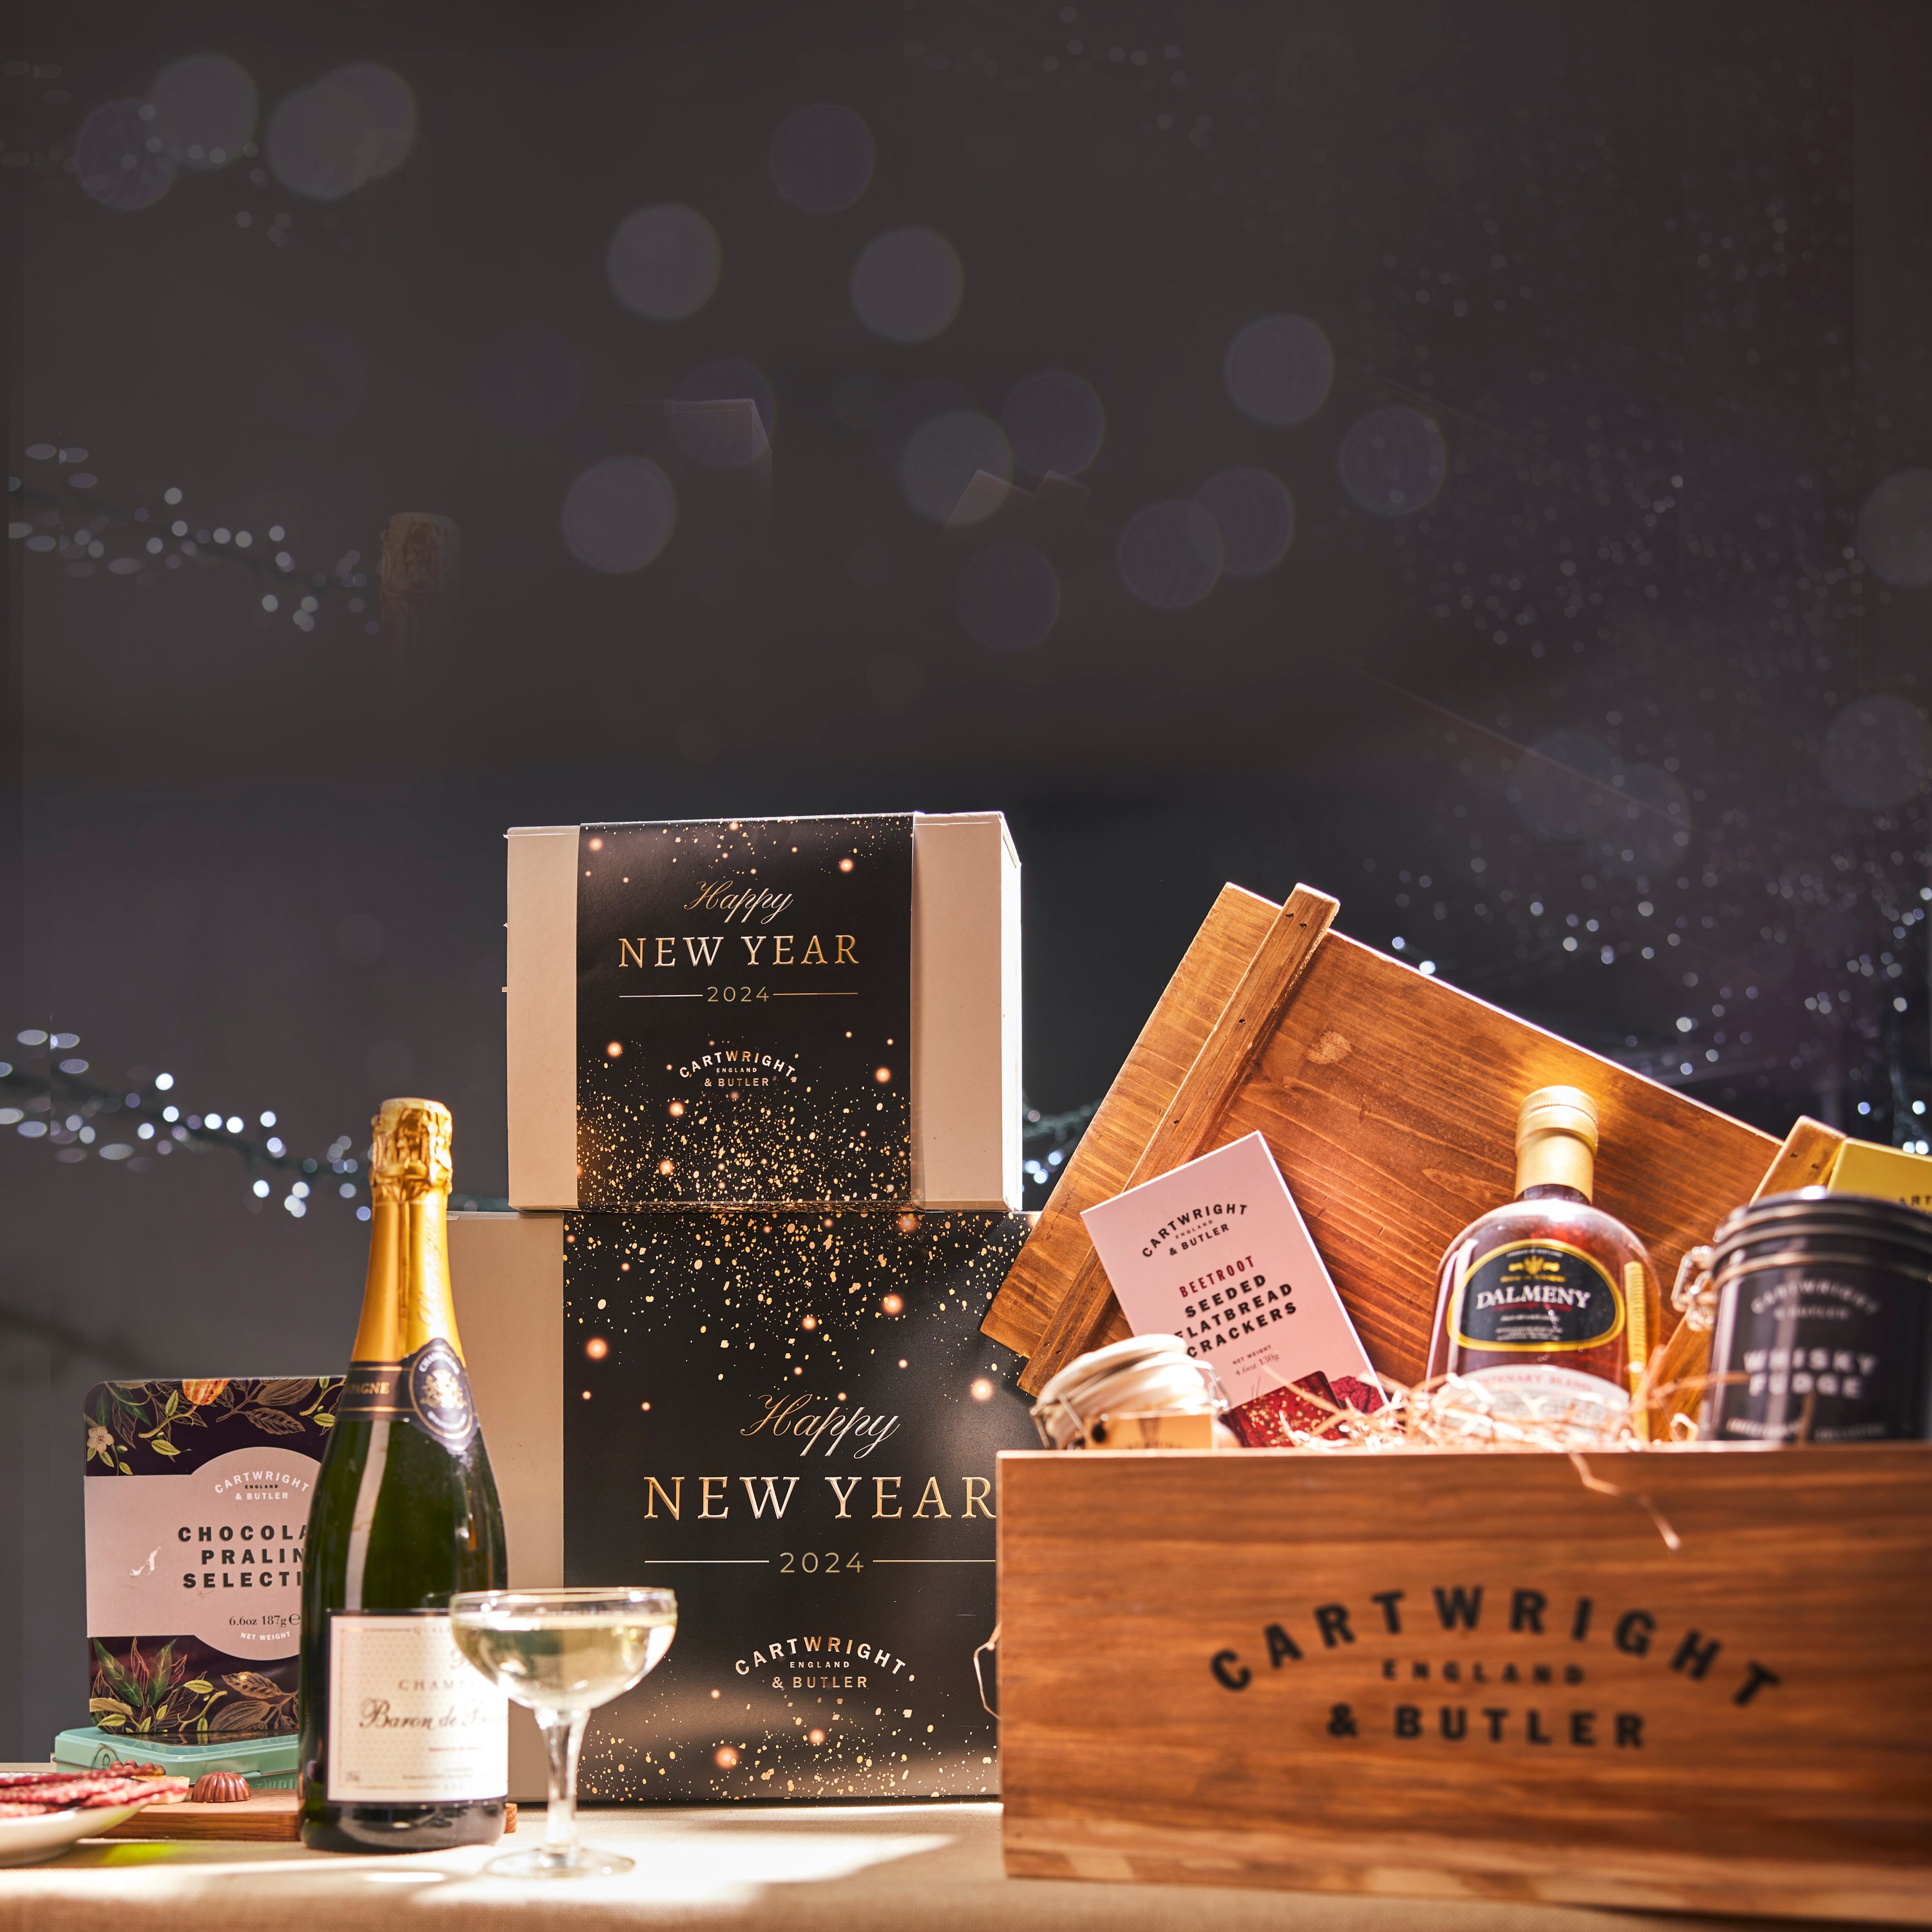 Festive cartwright and butler new years hamper with assorted items 